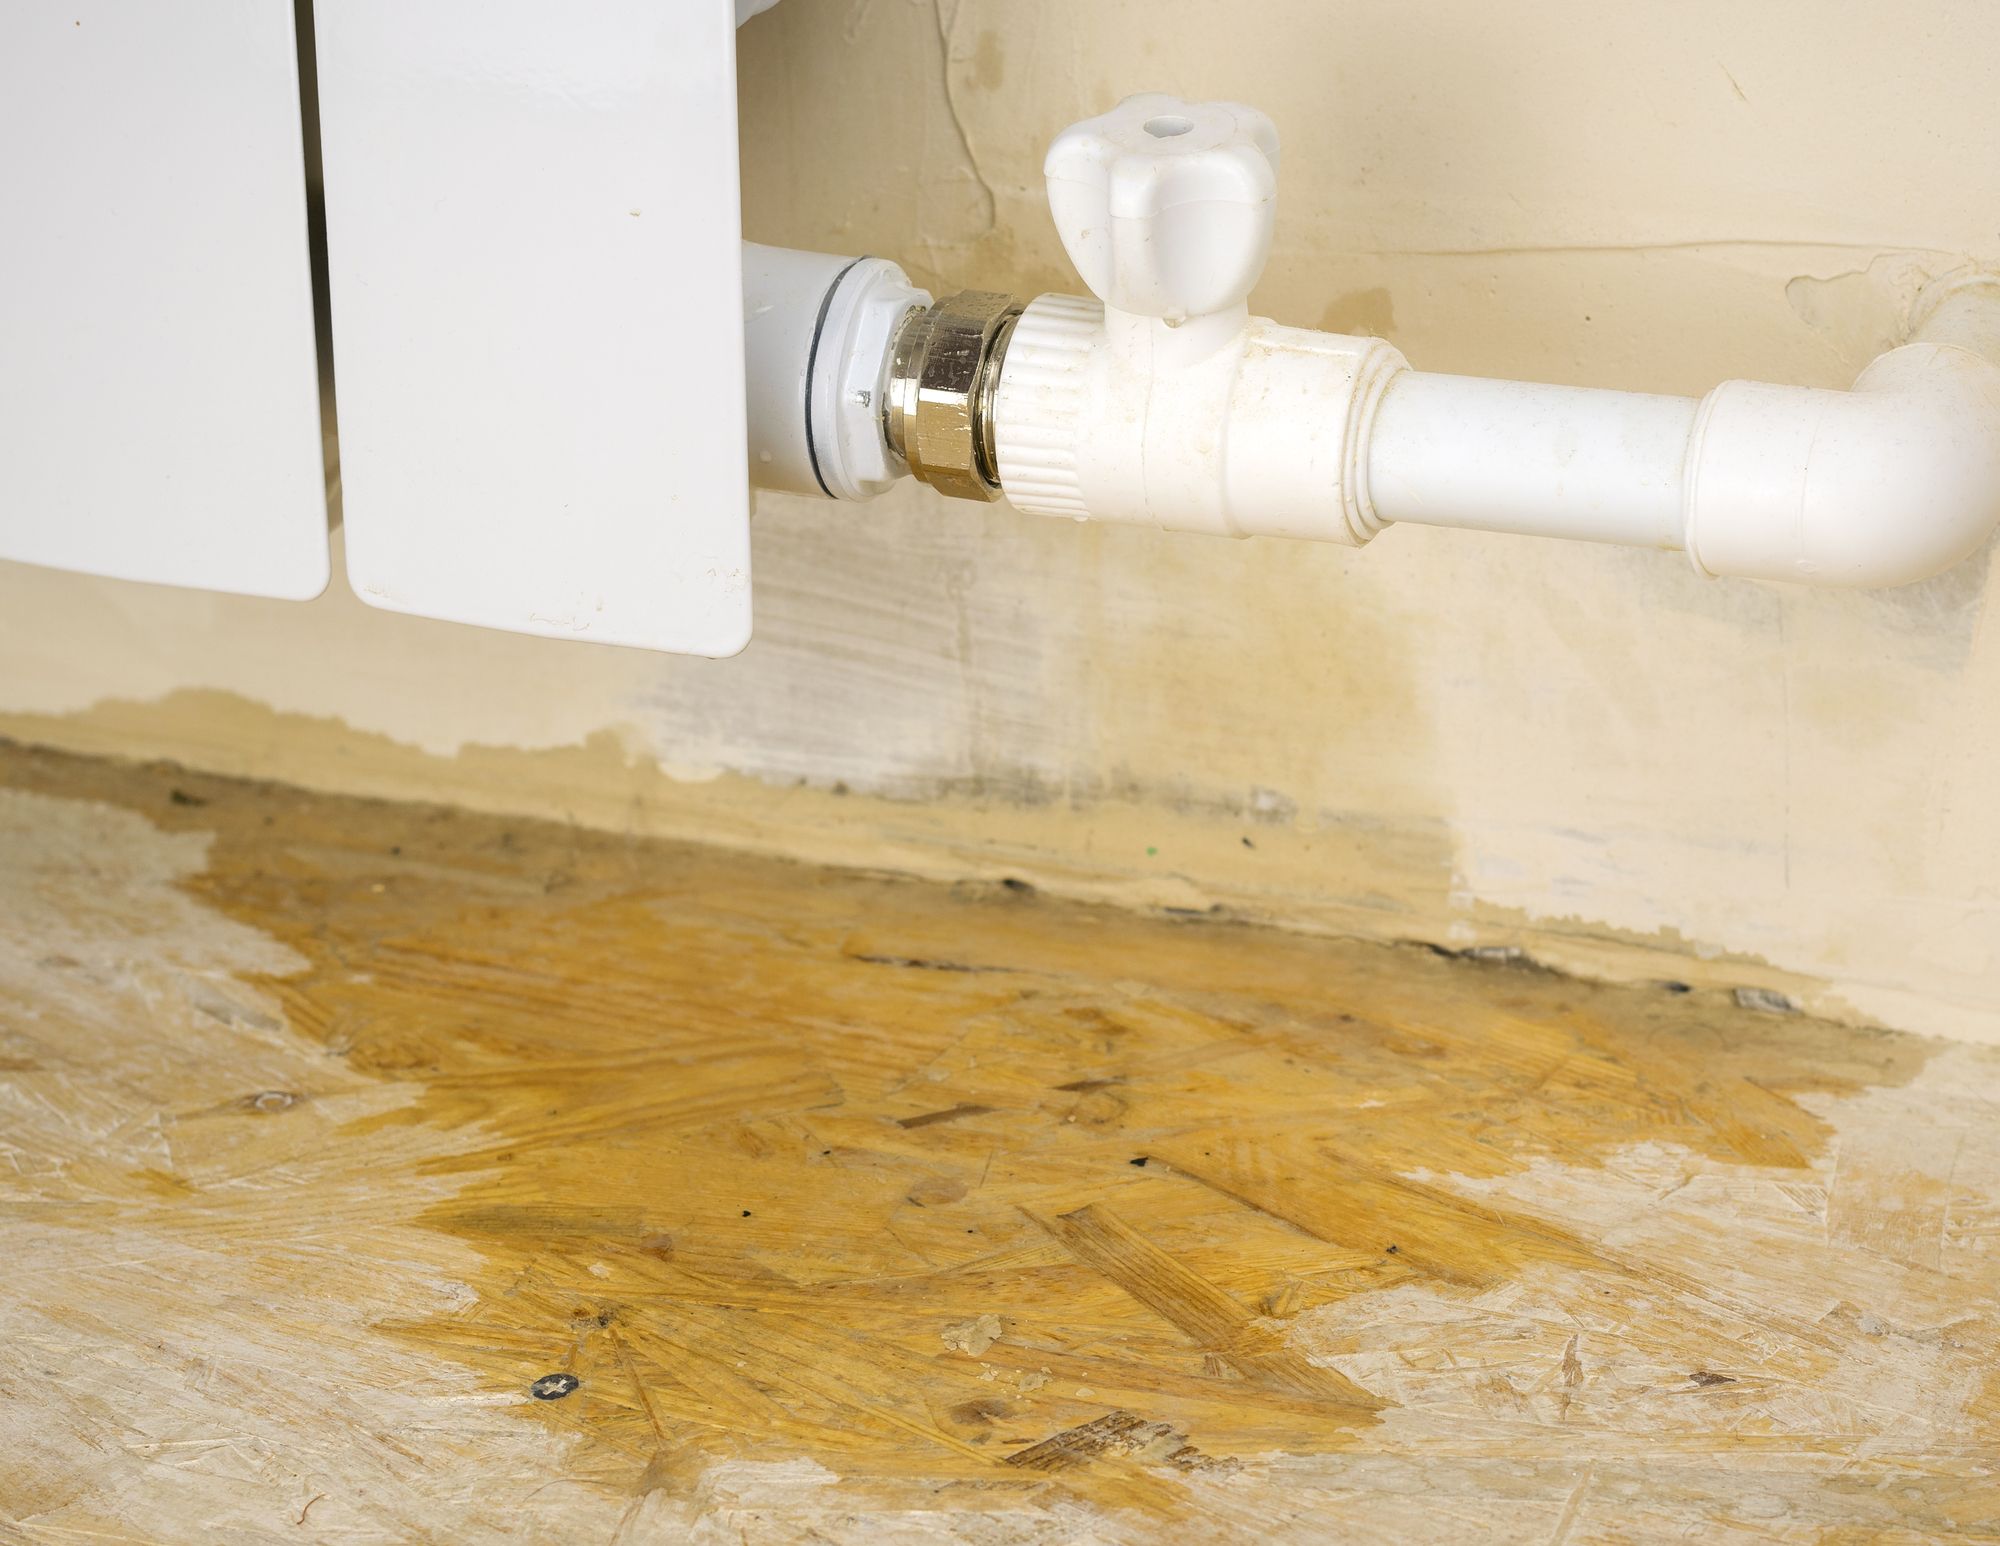 How to Check for Bathroom Leaks